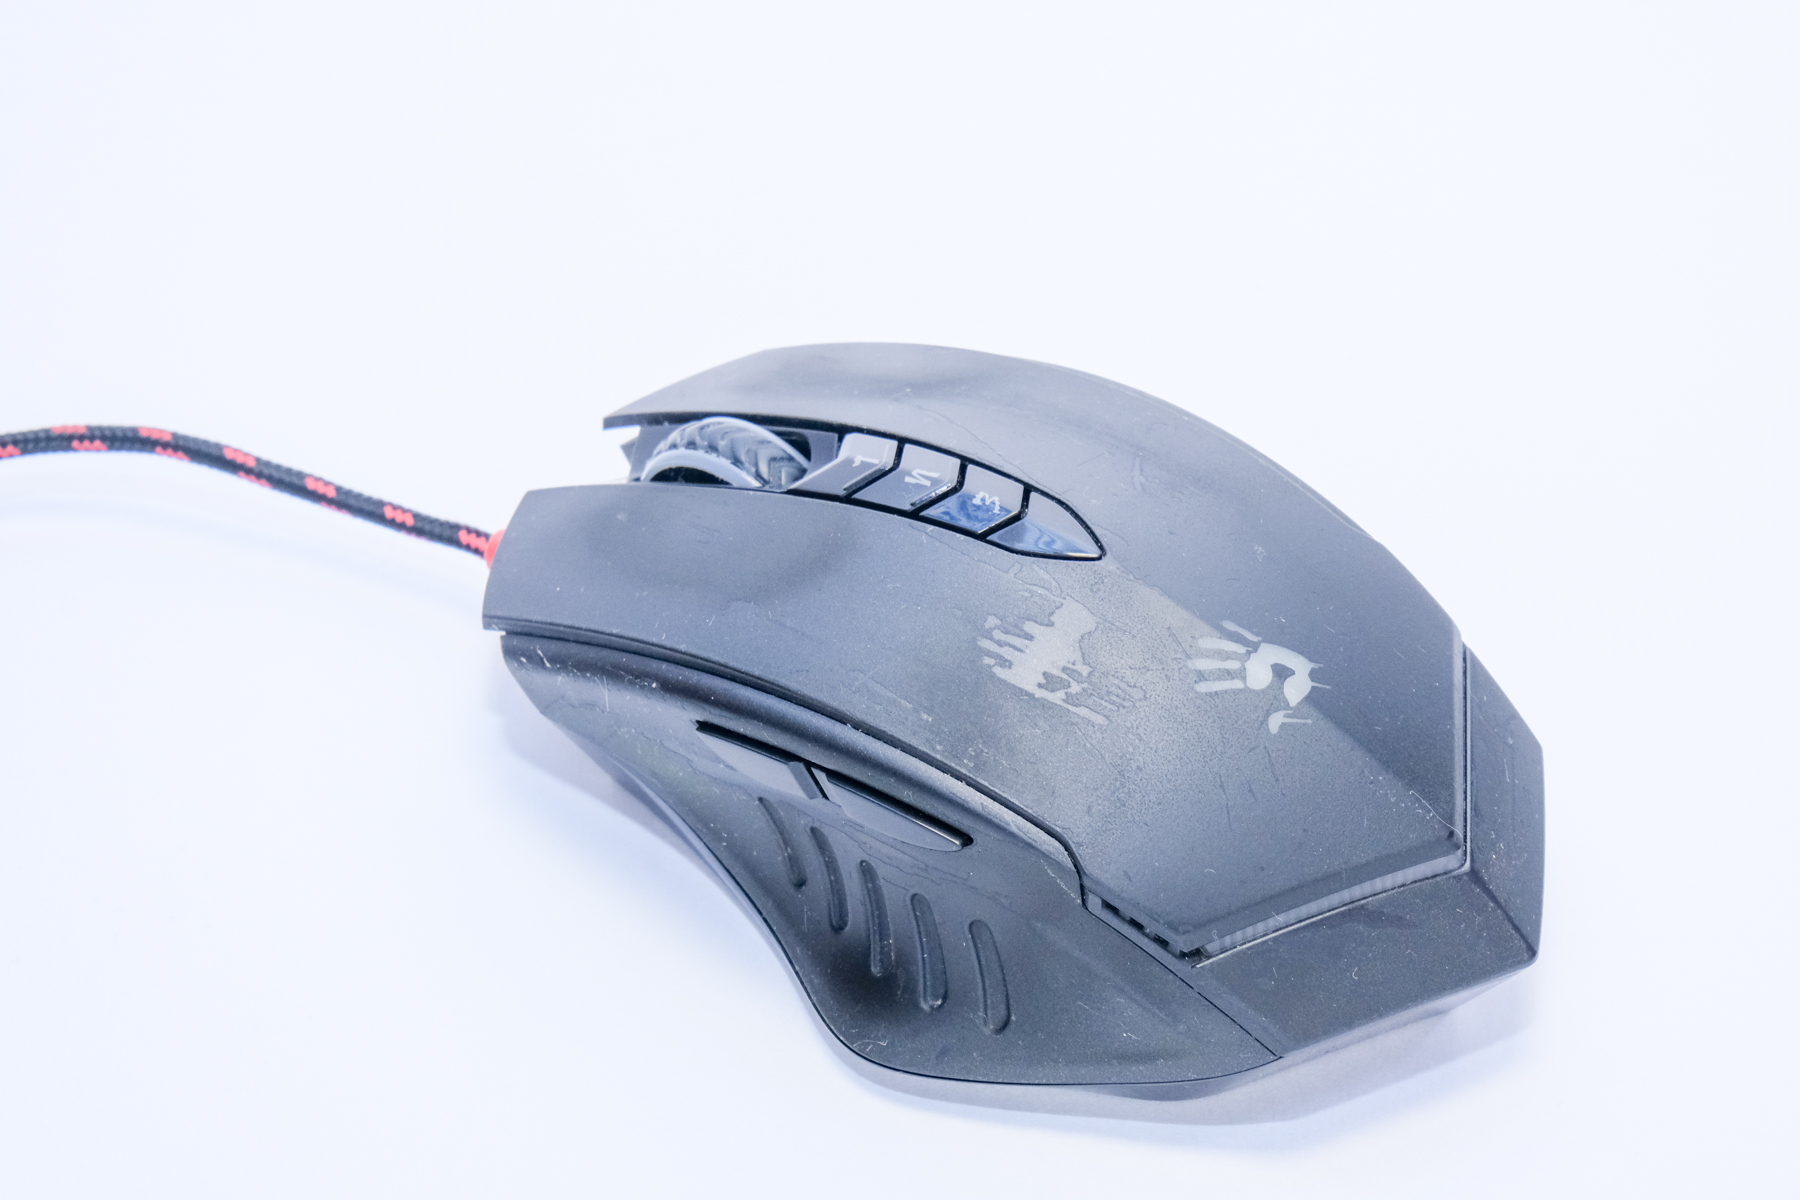 Eac blacklisted device bloody mouse rust обход фото 18